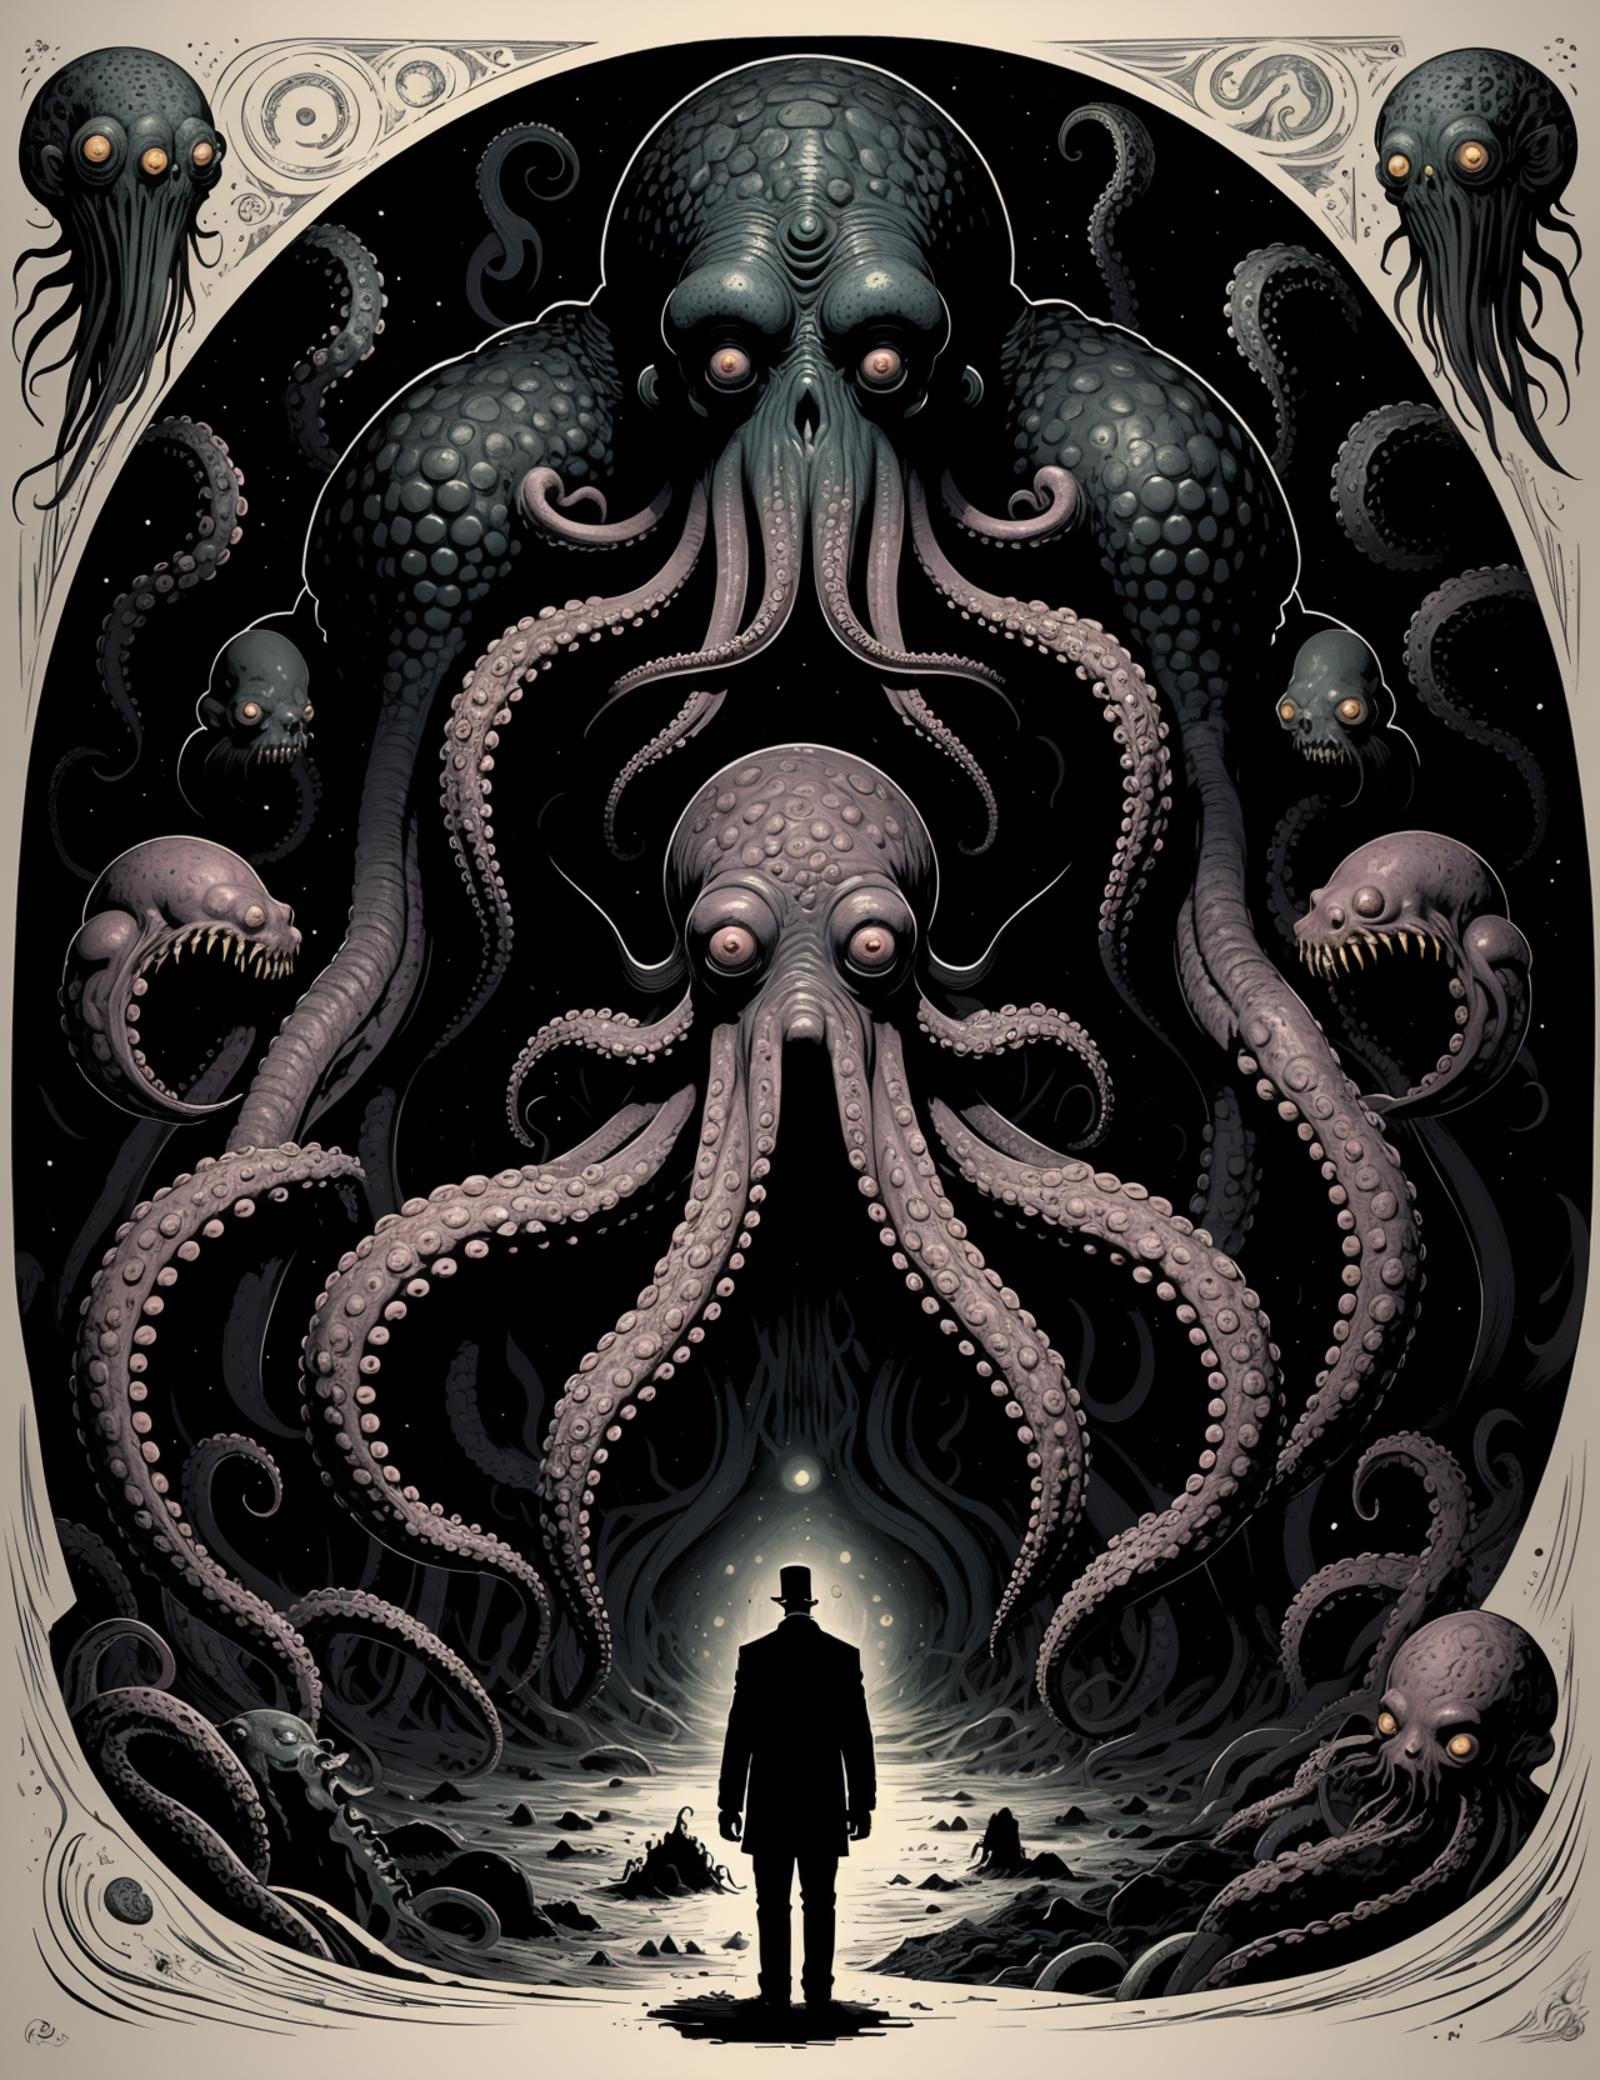 A man facing a group of tentacle monsters in a dark setting.